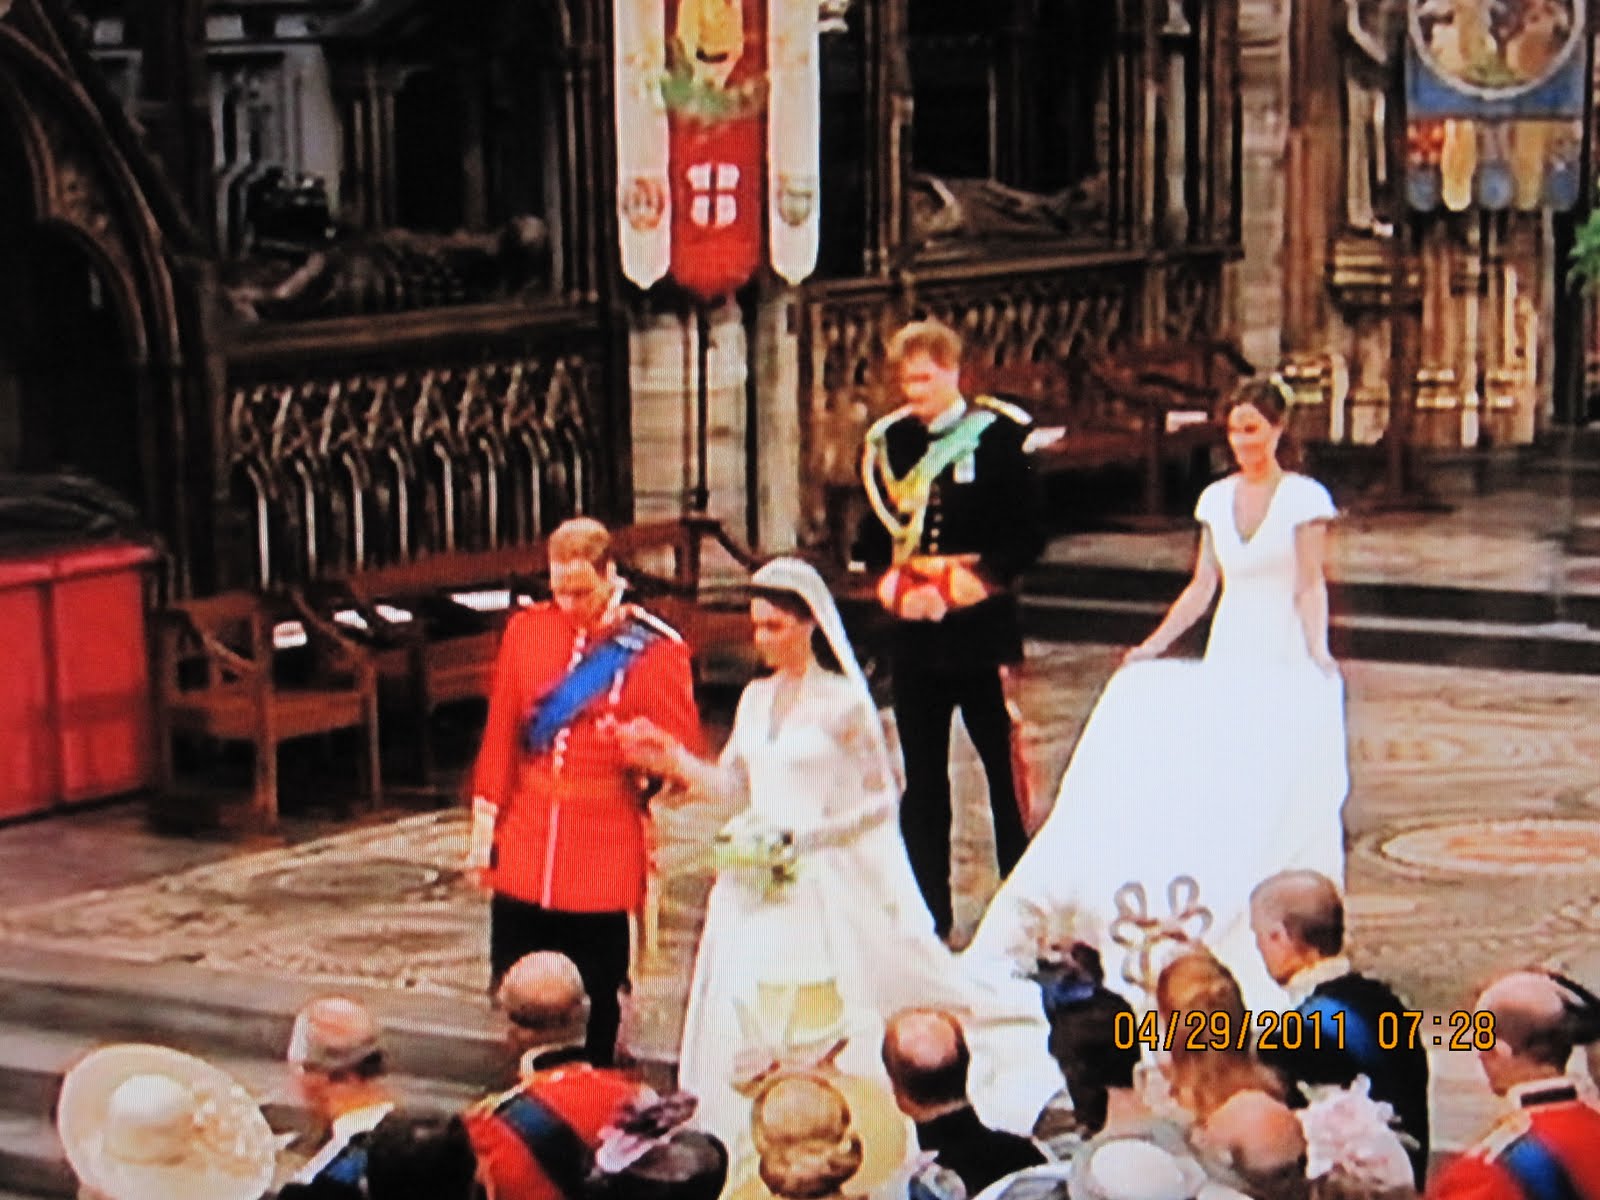 LadyBlogr: Pictures Of Royal Wedding